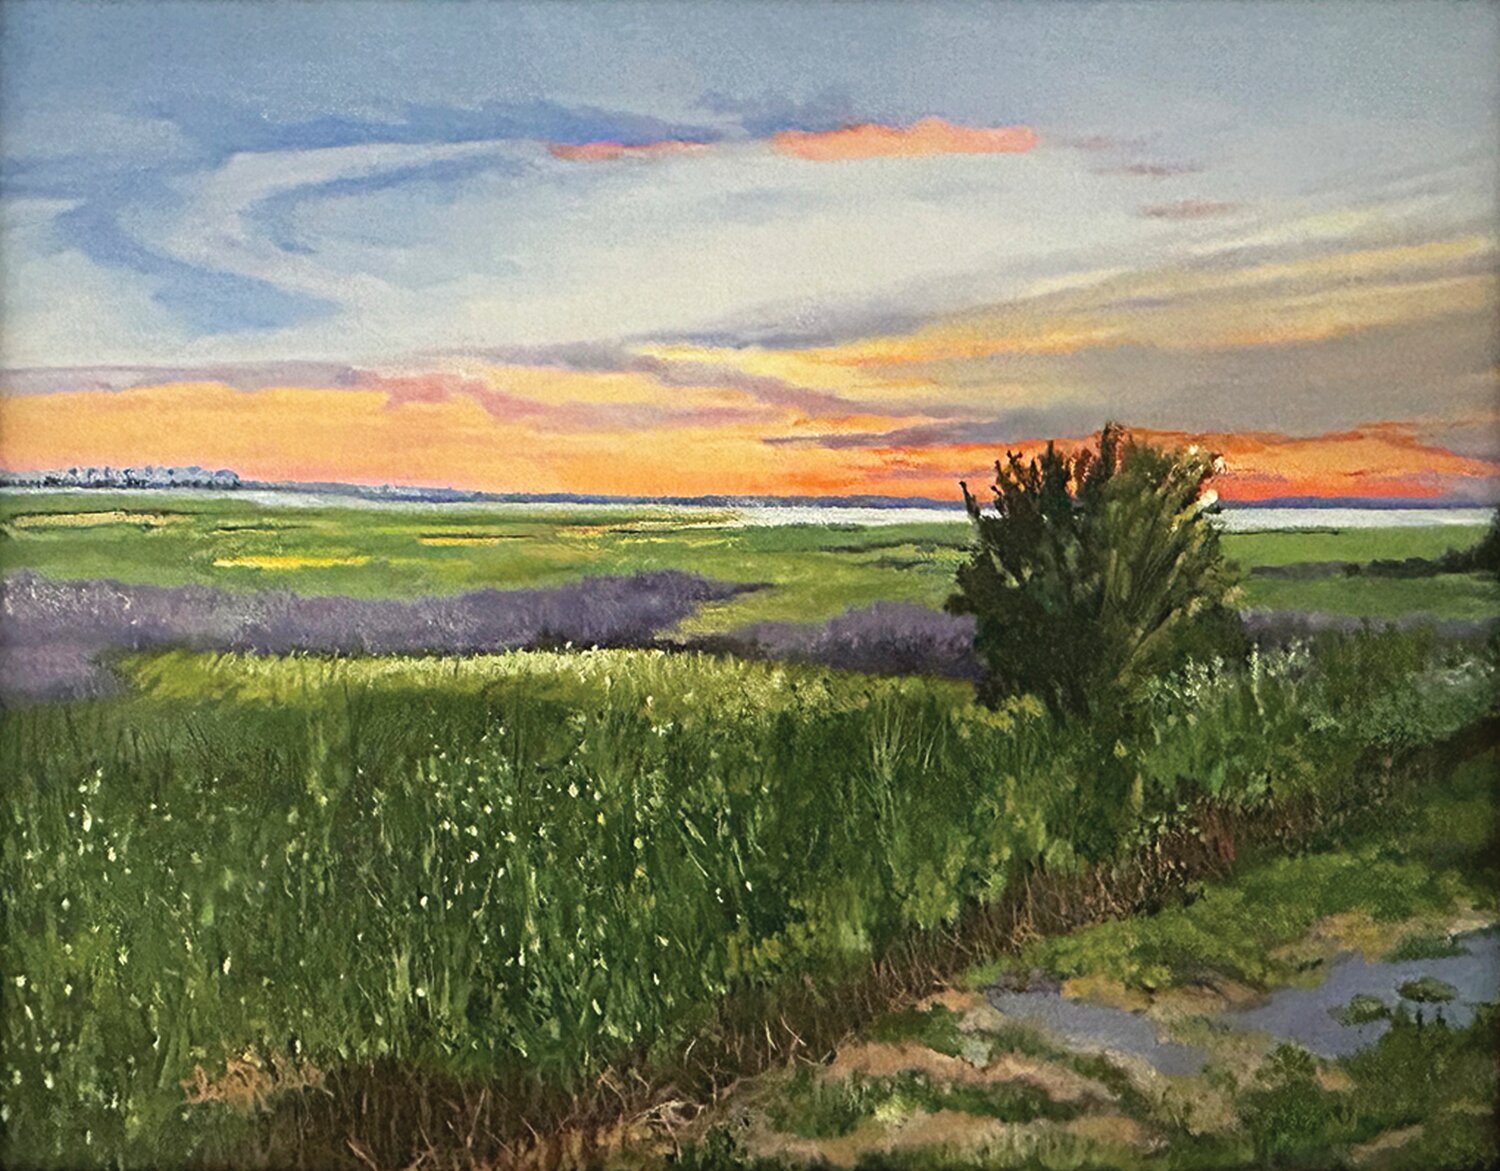 “View From The Terrace” is an oil painting by Ilene Rubin.